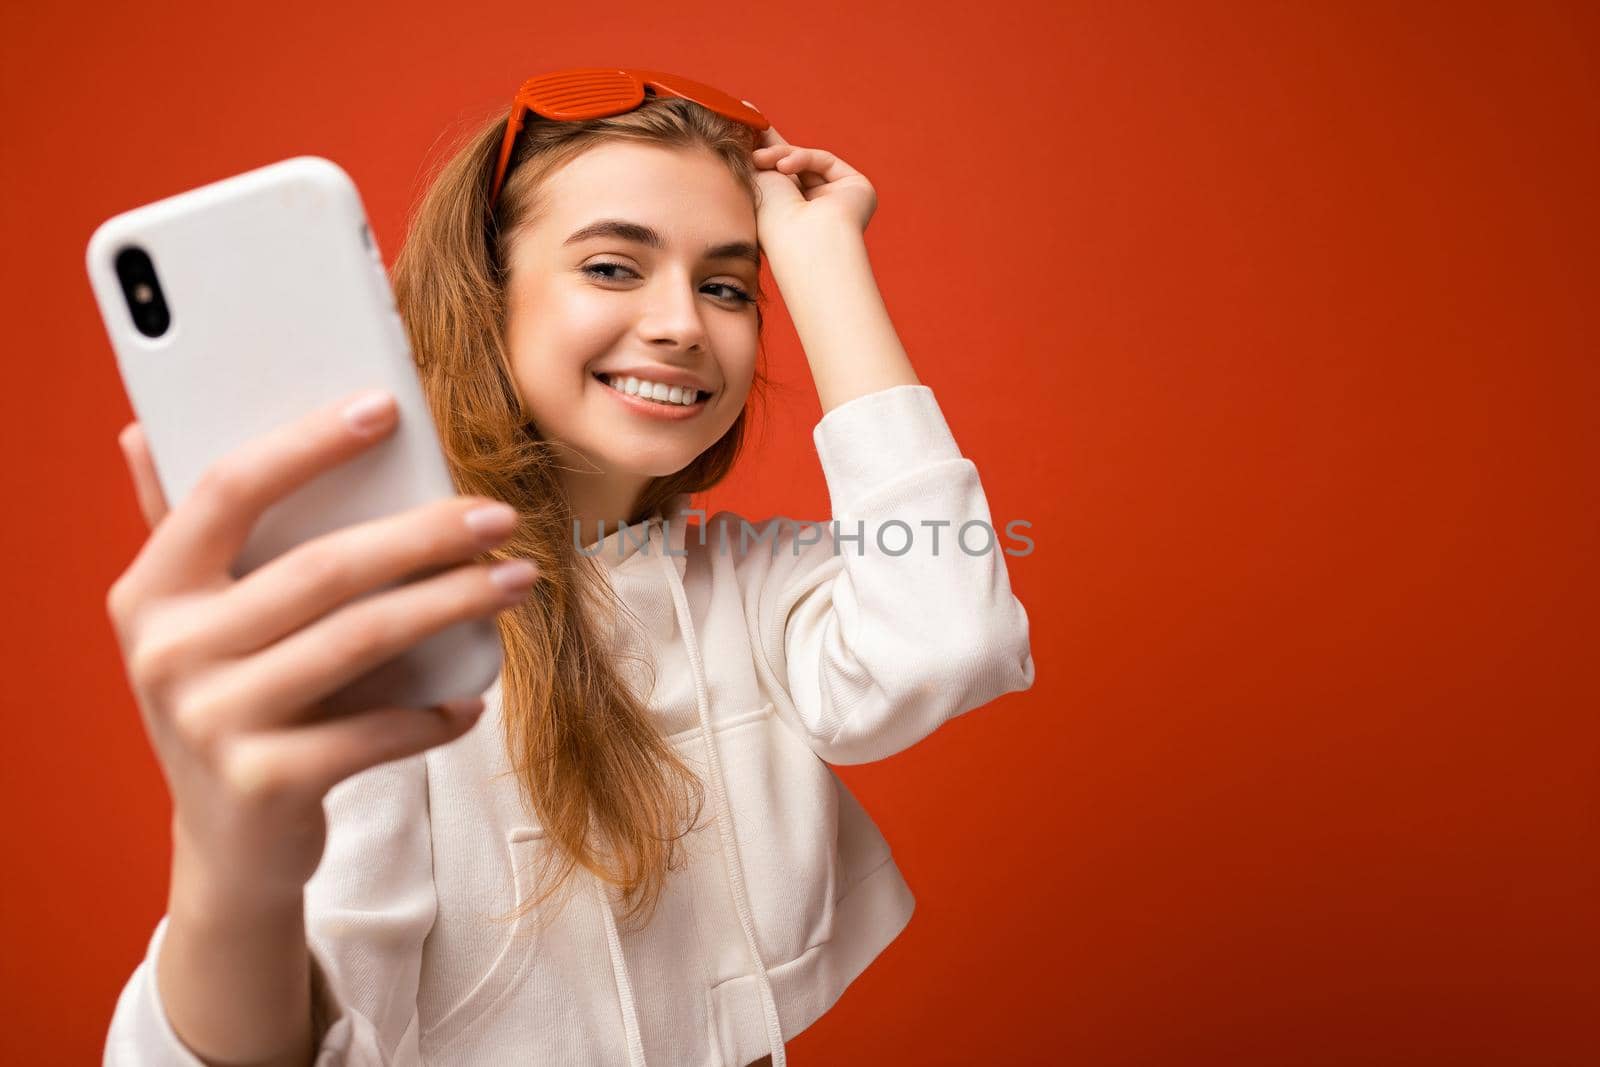 Closeup portrait of sexy attractive positive smiling young blonde woman wearing stylish white hoodie and funny colorful glasses standing isolated over colourful background holding and using mobile phone taking selfie photo looking at gadjet. Copy space